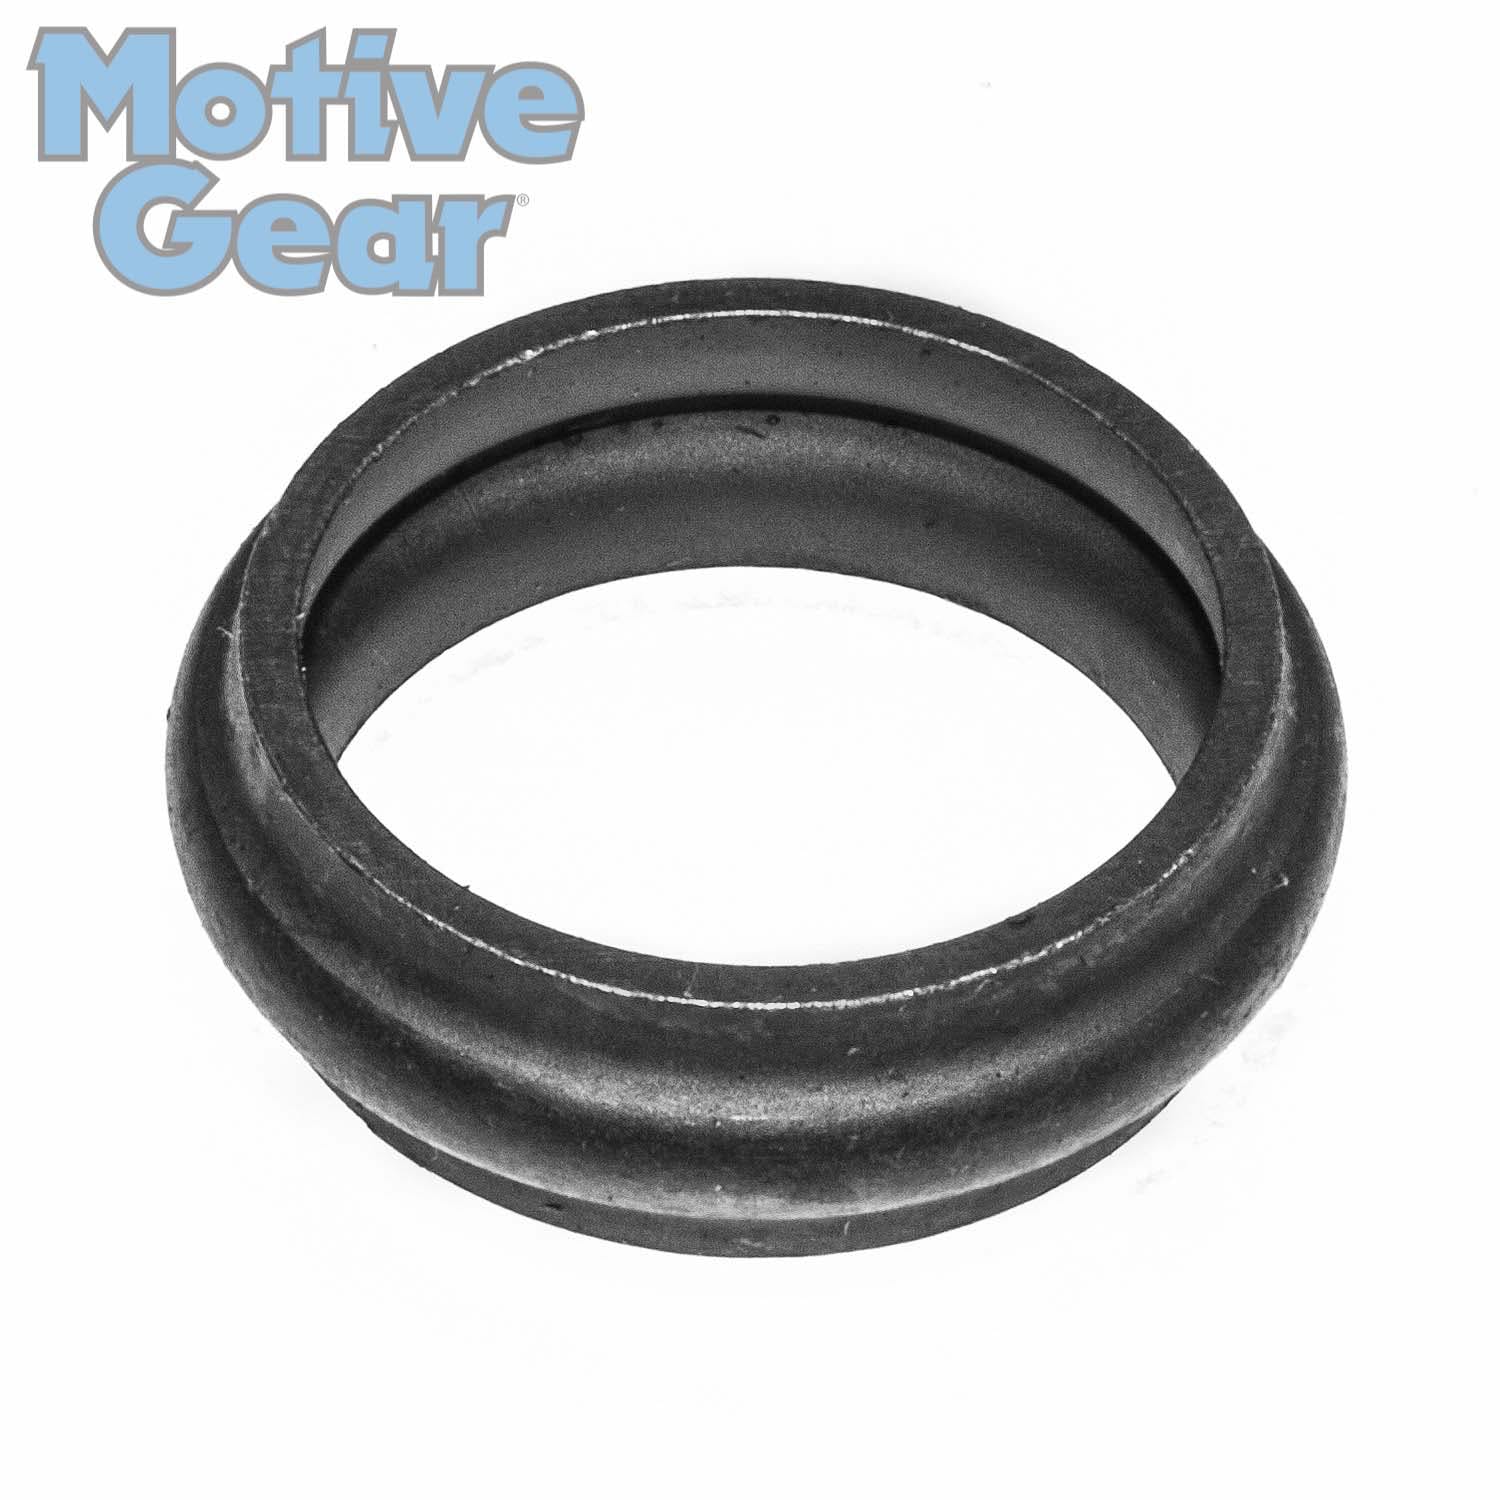 Motive Gear 3507575 Differential Crush Sleeve